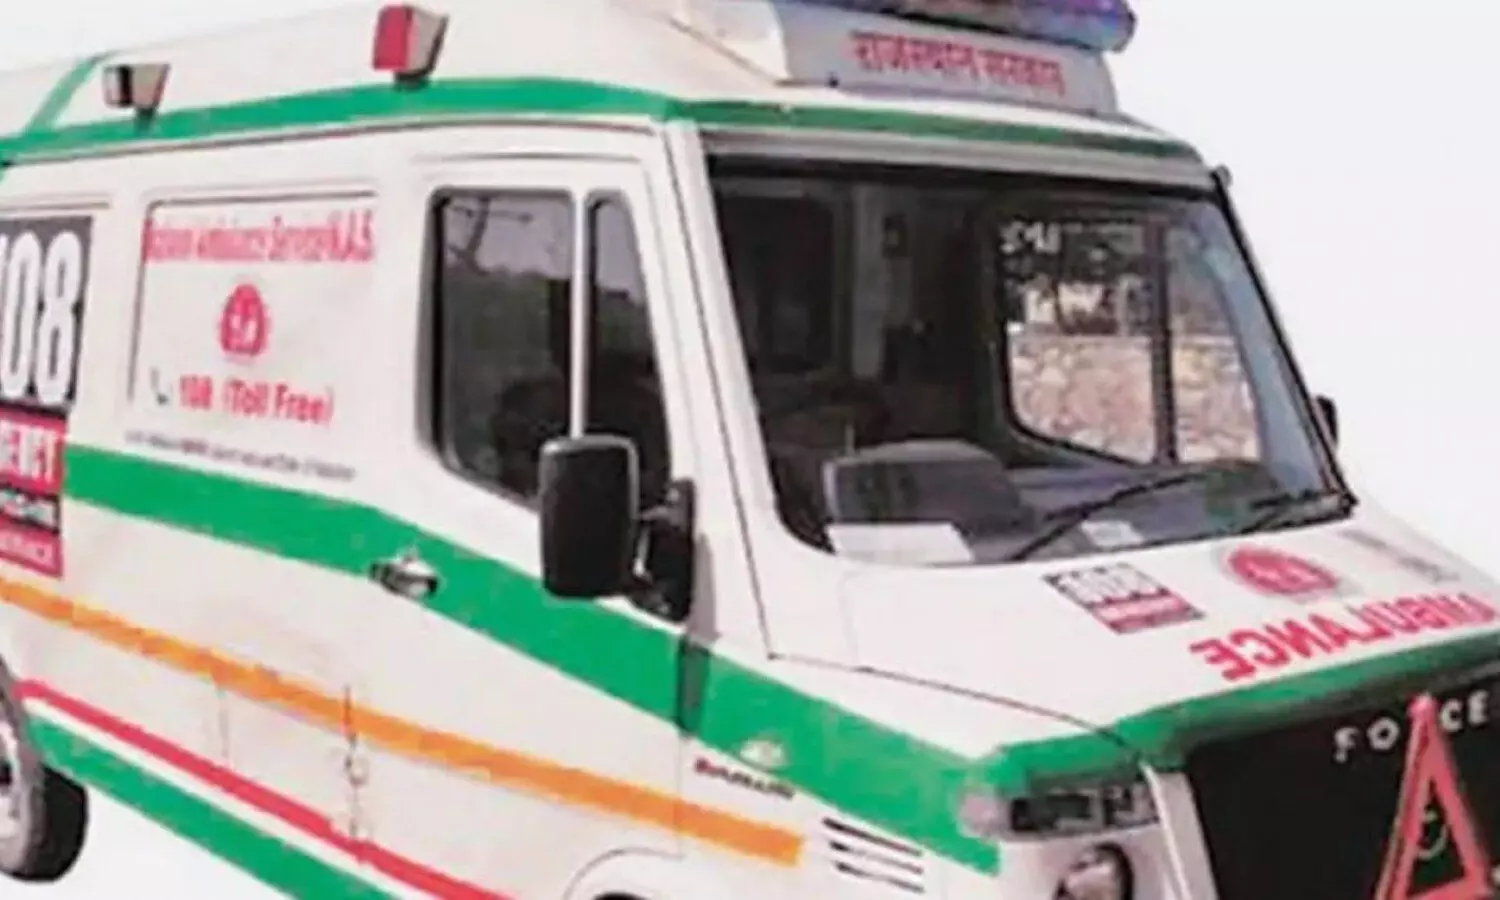 UP Crores scam in NHM ambulance purchase investigation started